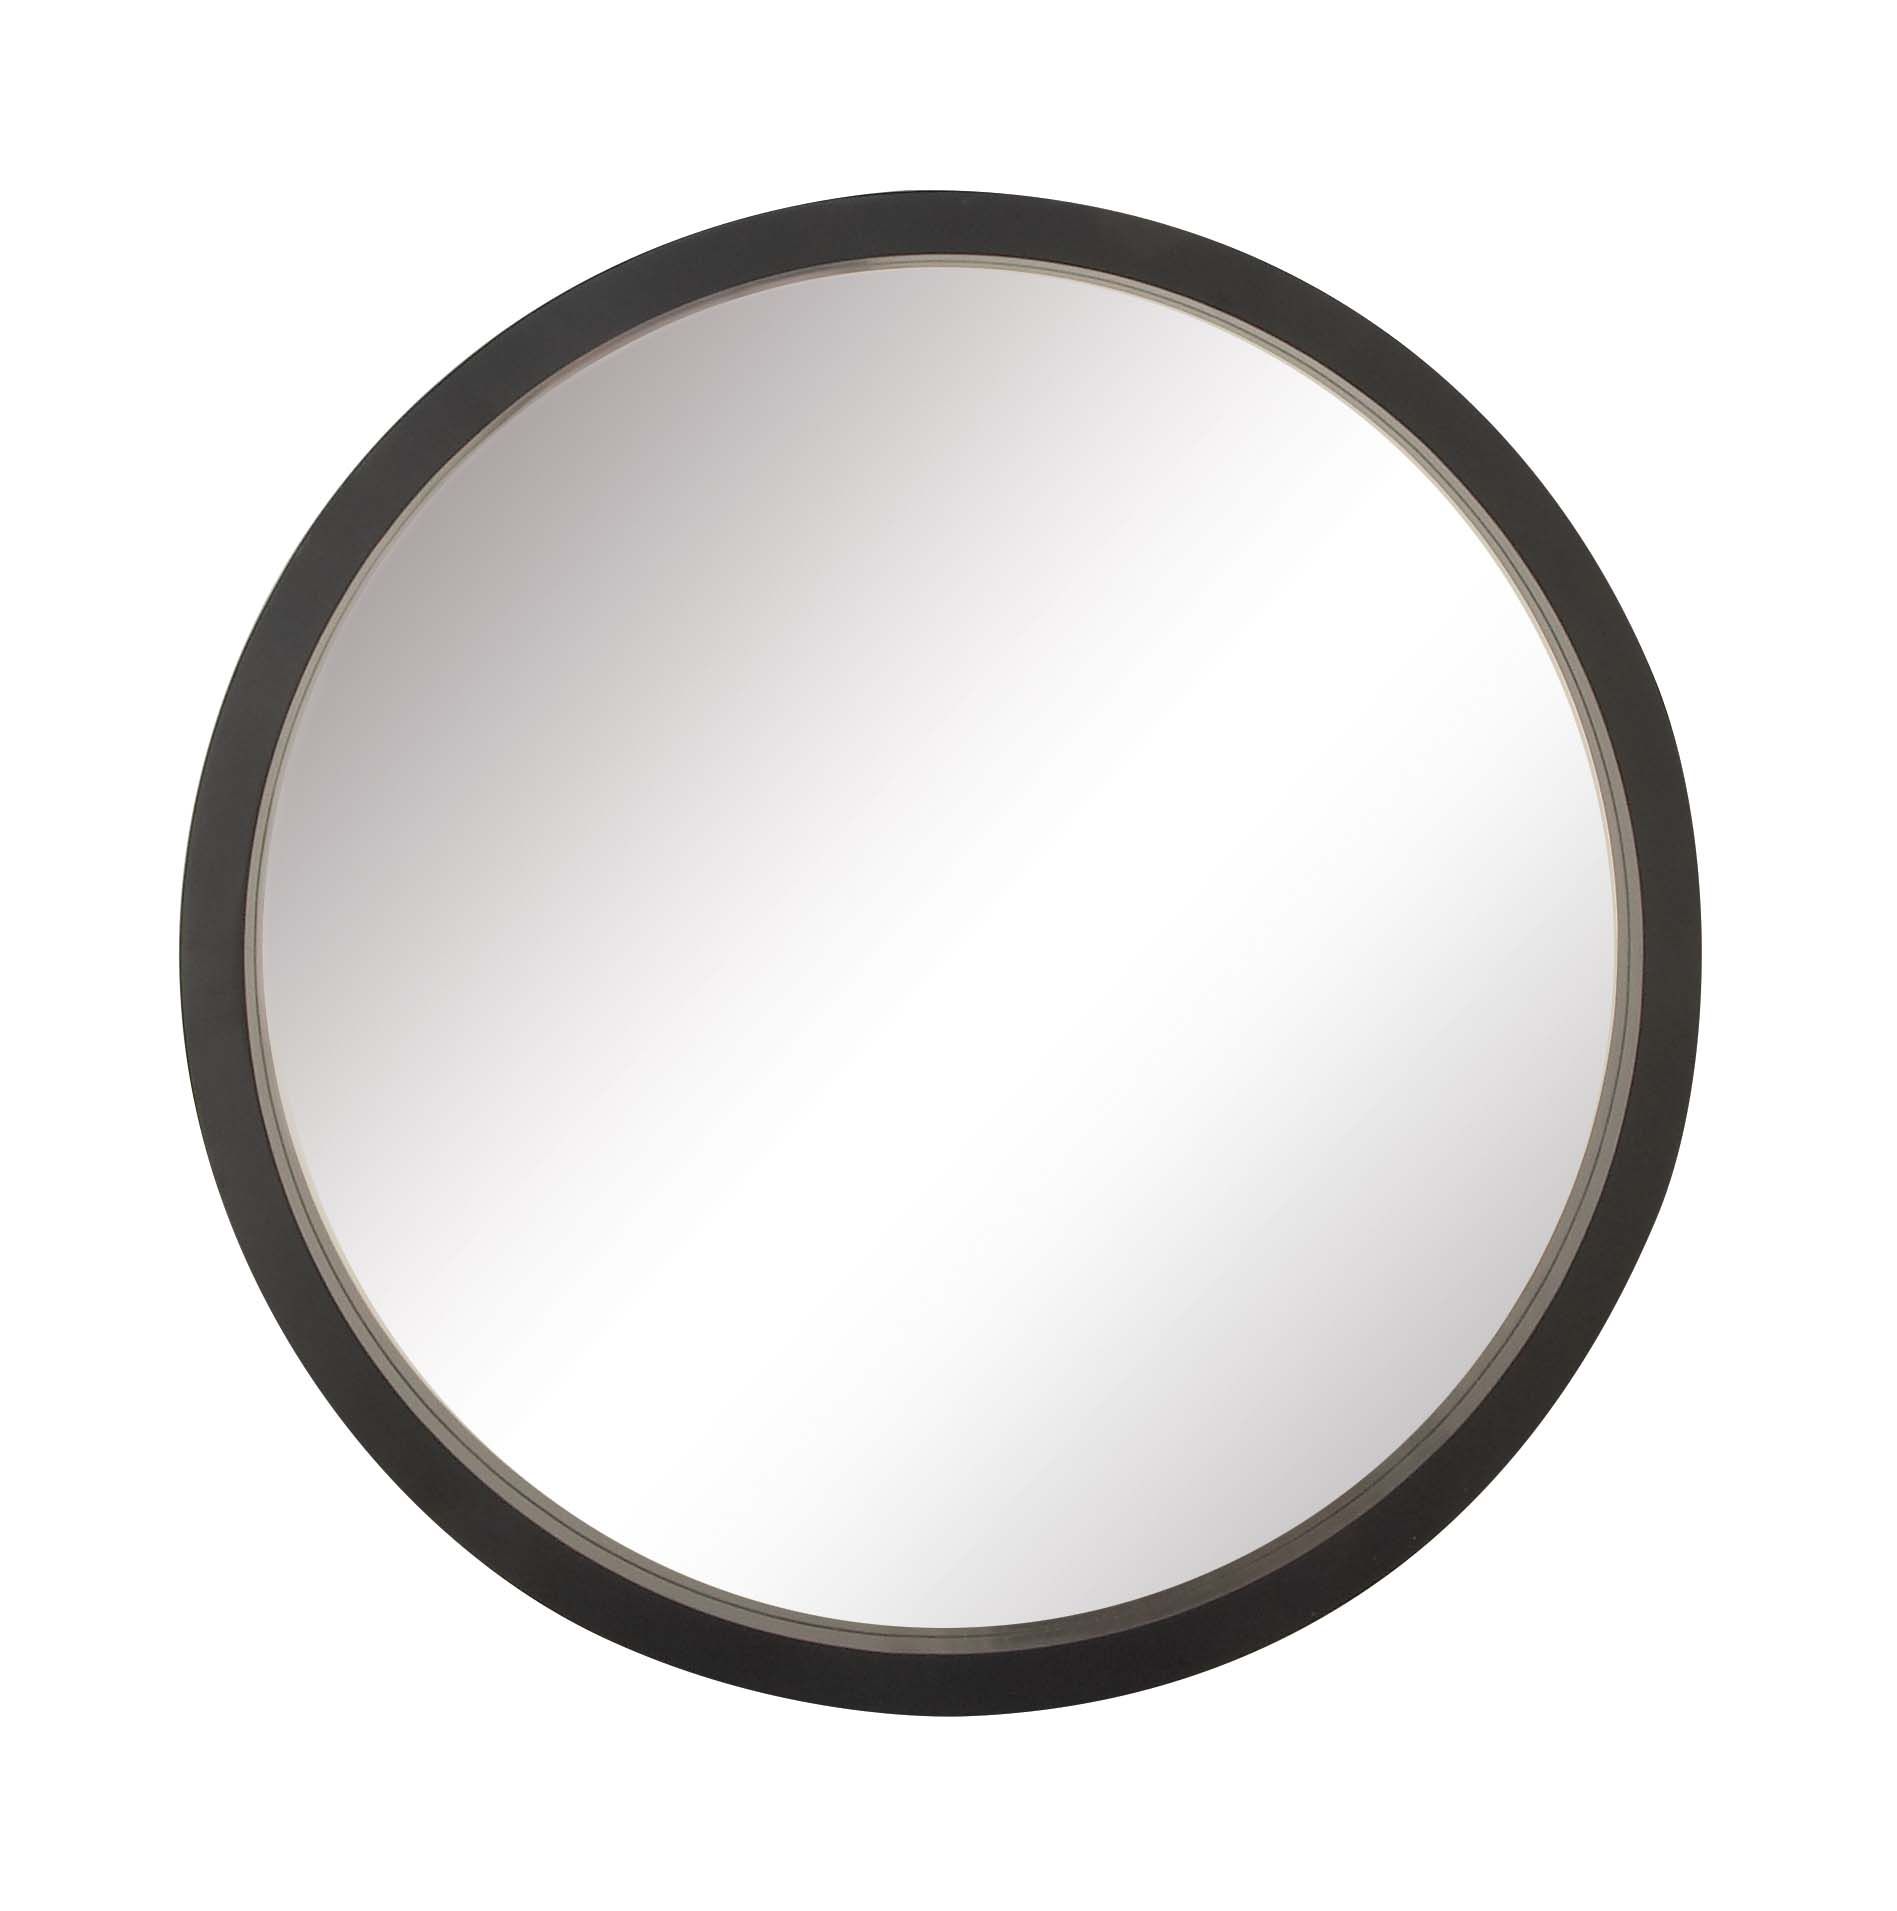 Decmode 32 Inch Contemporary Wooden Framed Round Wall Mirror, Black With Regard To Round Stacked Wall Mirrors (View 11 of 15)